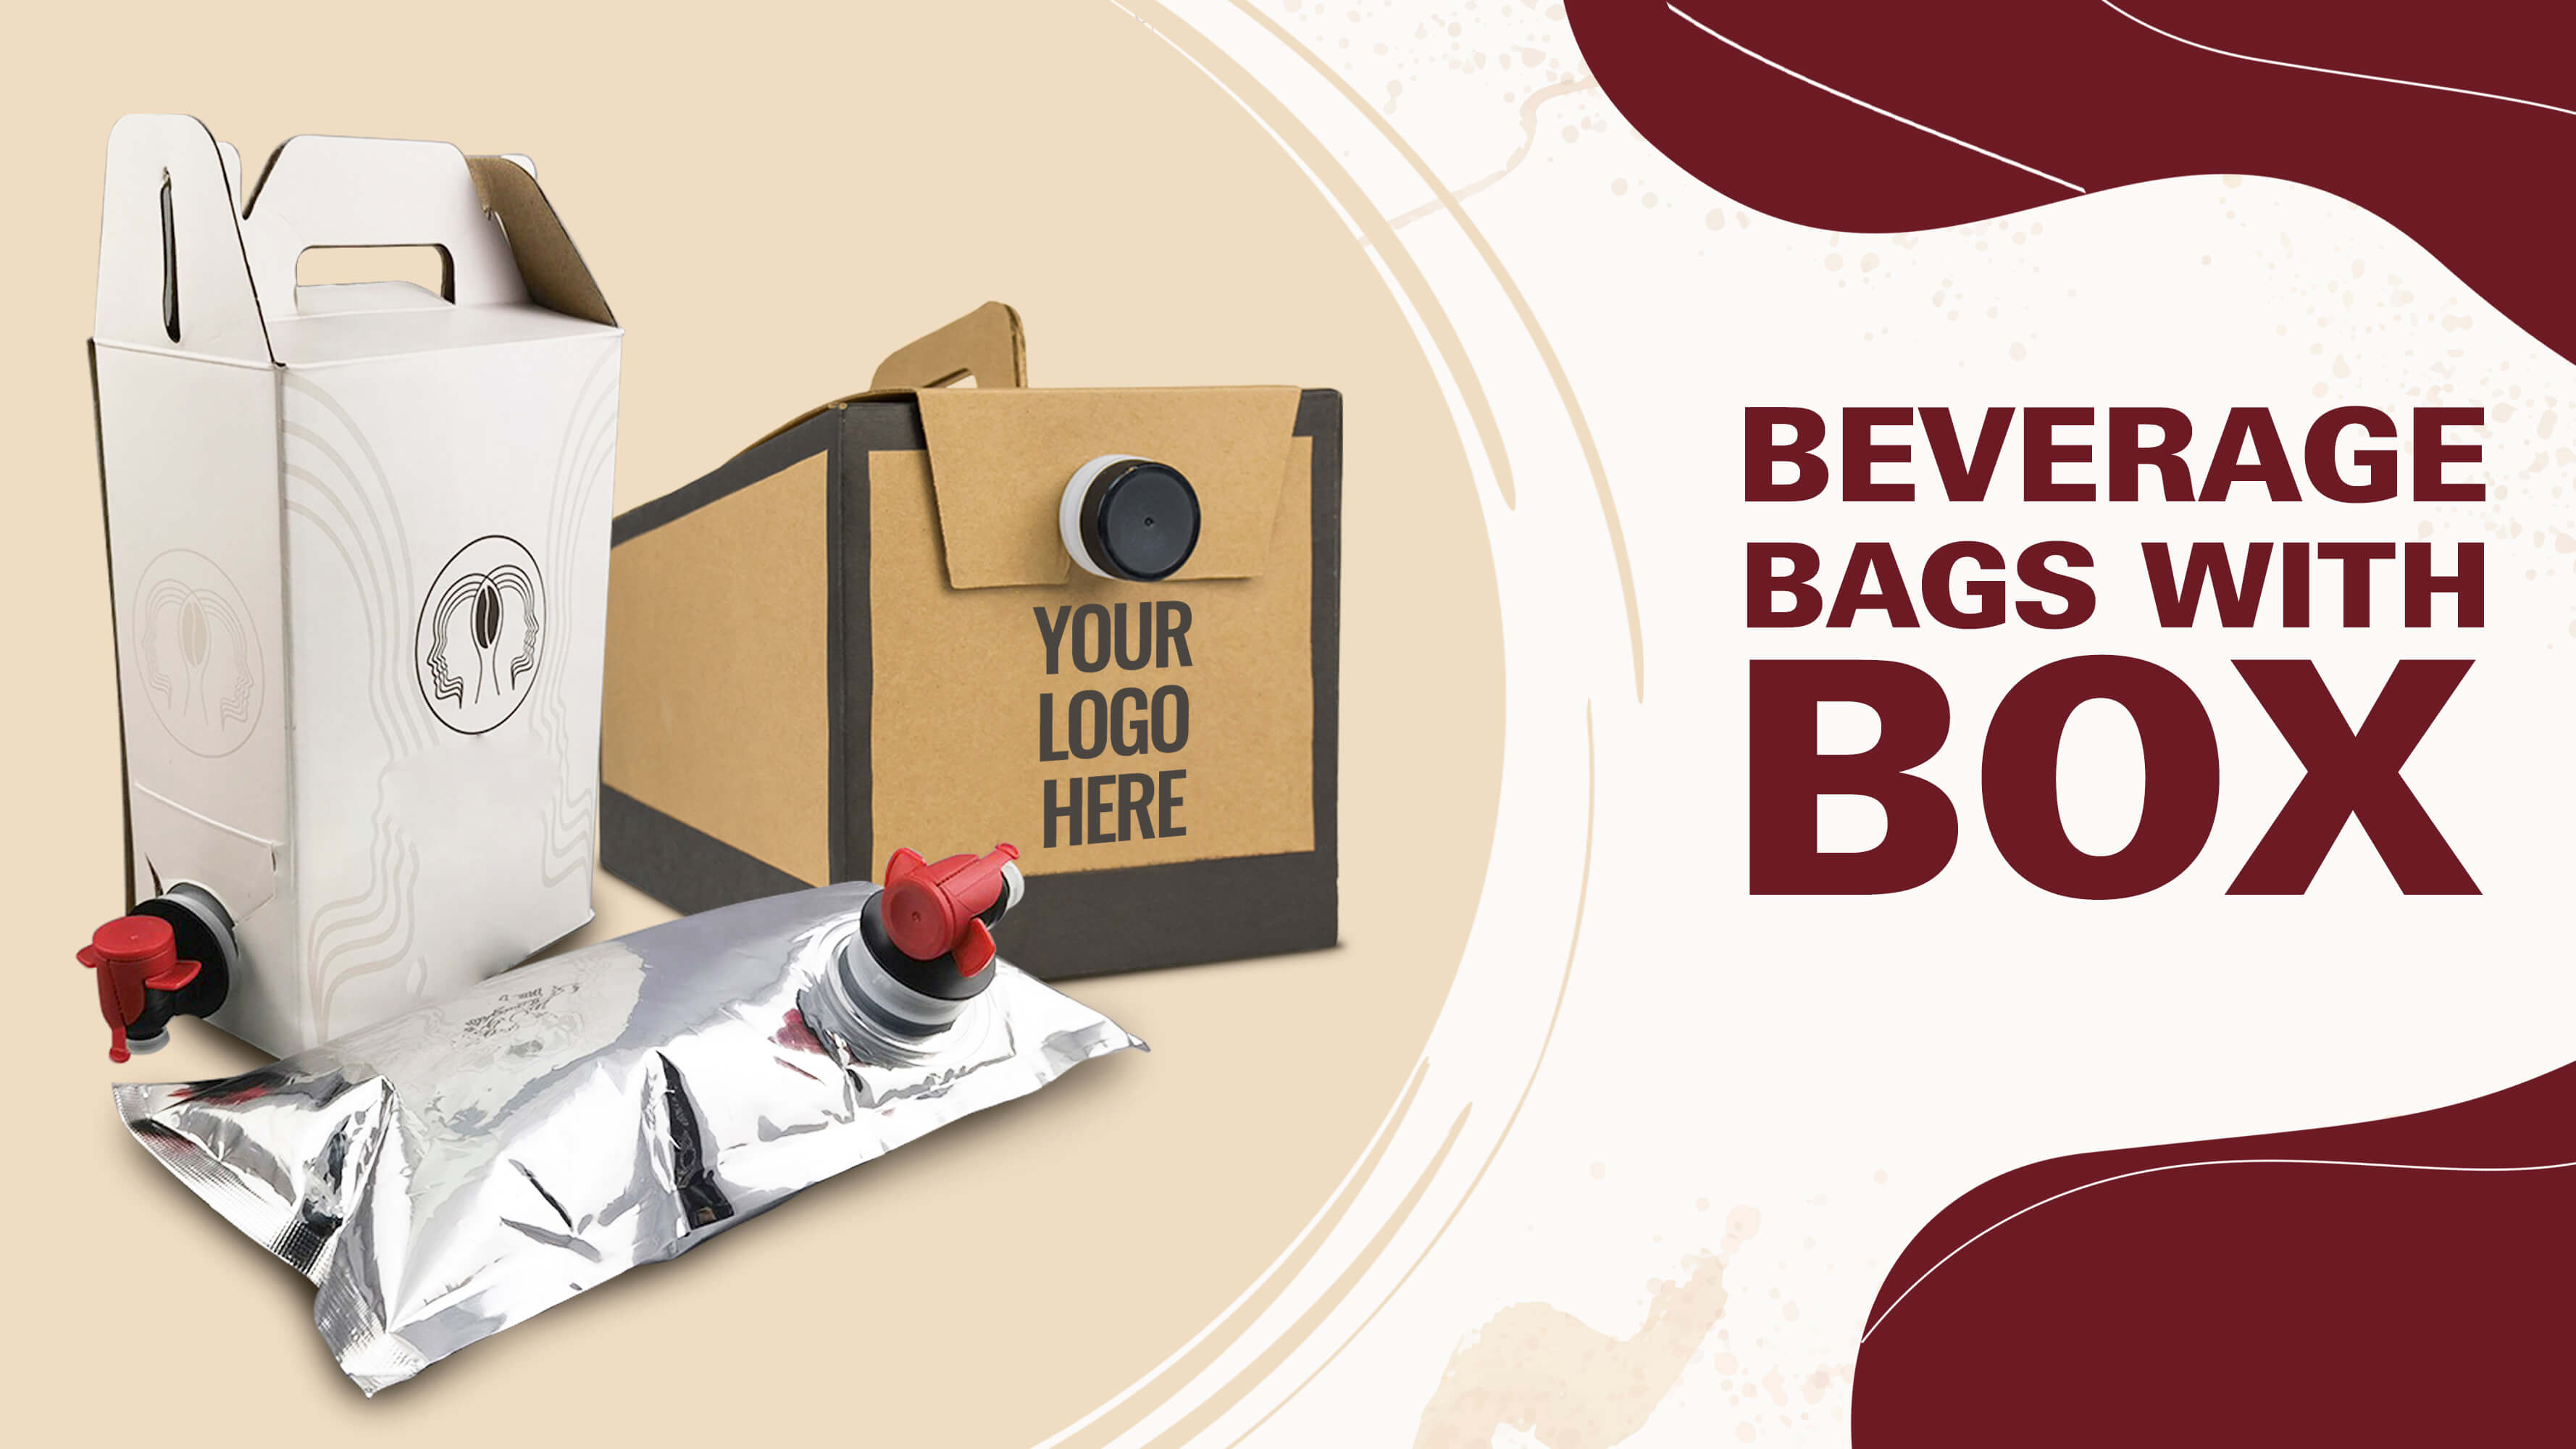 Beverage Bag with Box